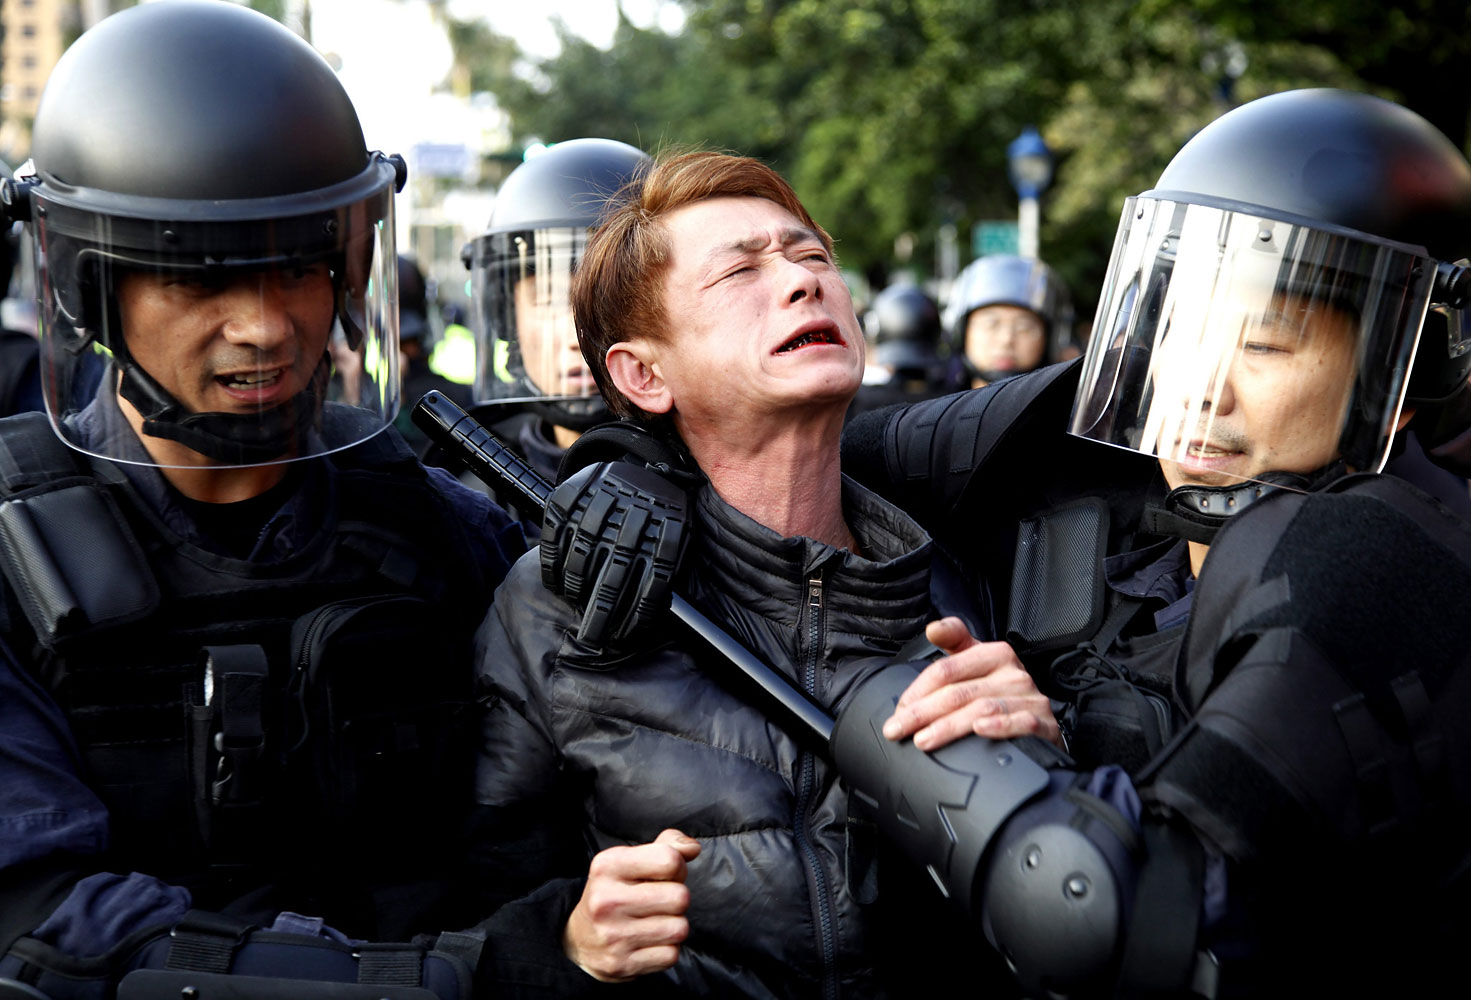 Riot police detain a protester near the Cabinet compound in Taipei, Taiwan, March 24, 2014.